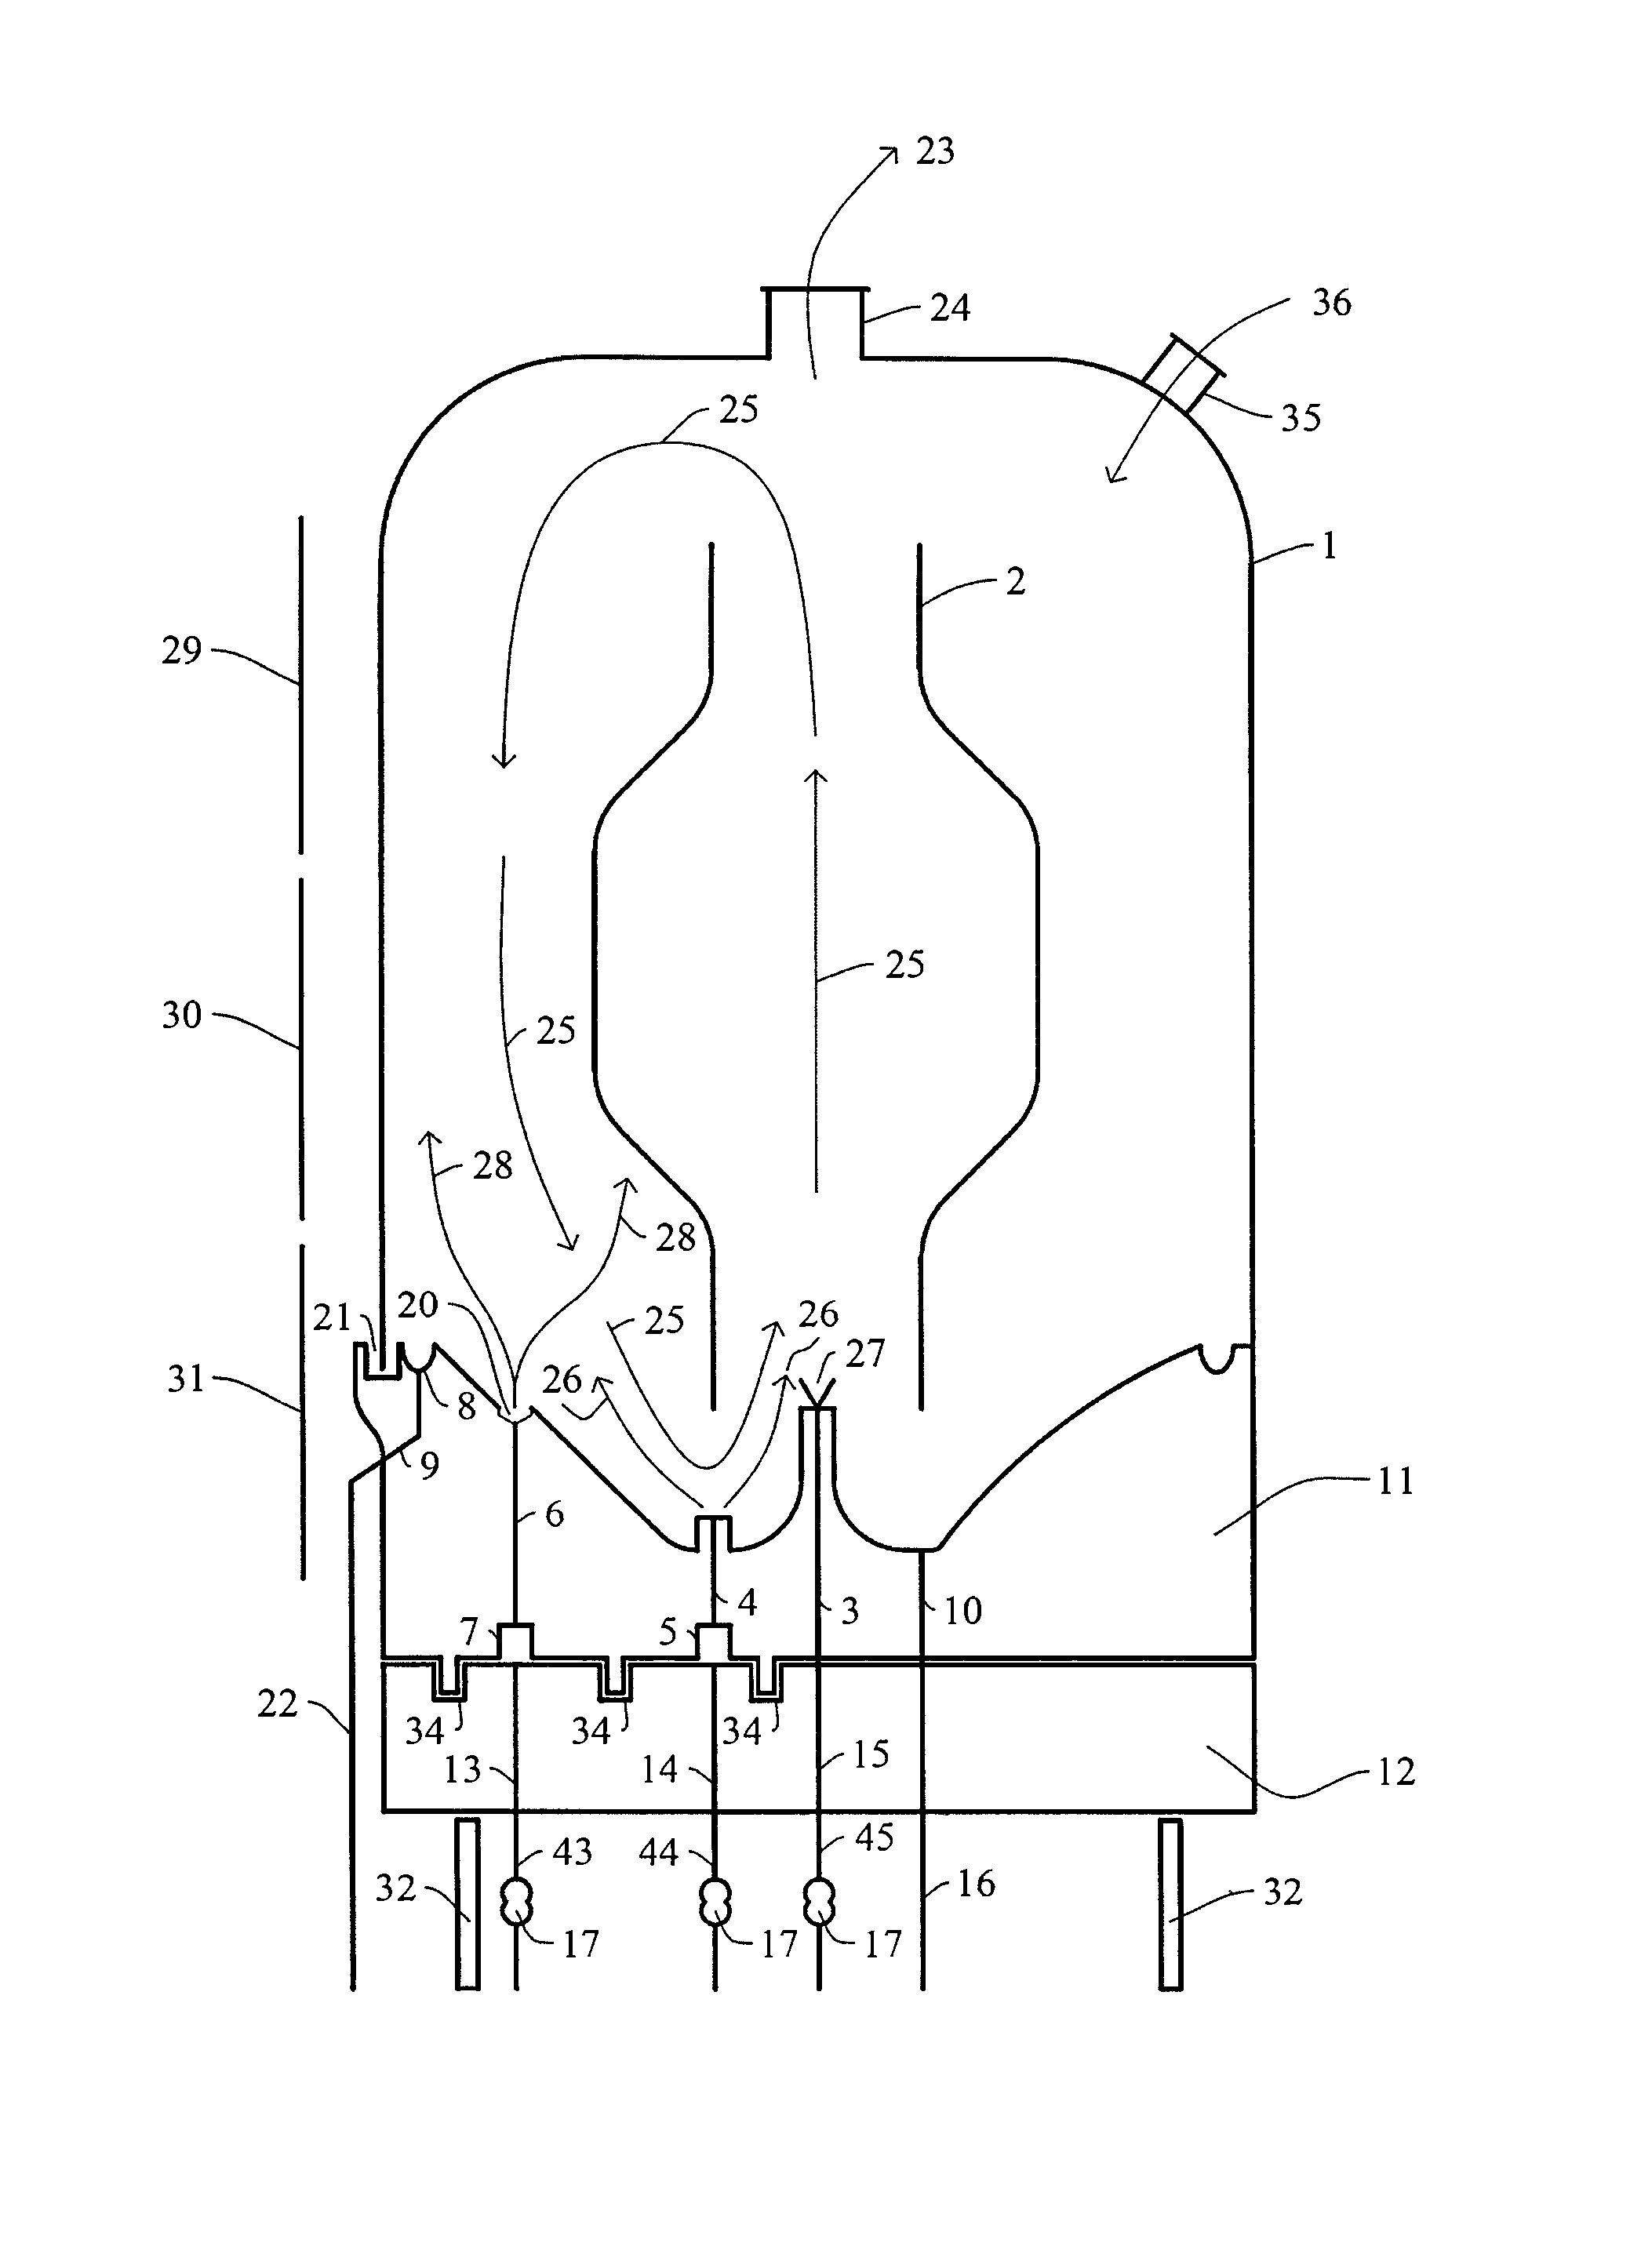 Draft Tube Fluidized Bed Reactor for Deposition of Granular Silicon